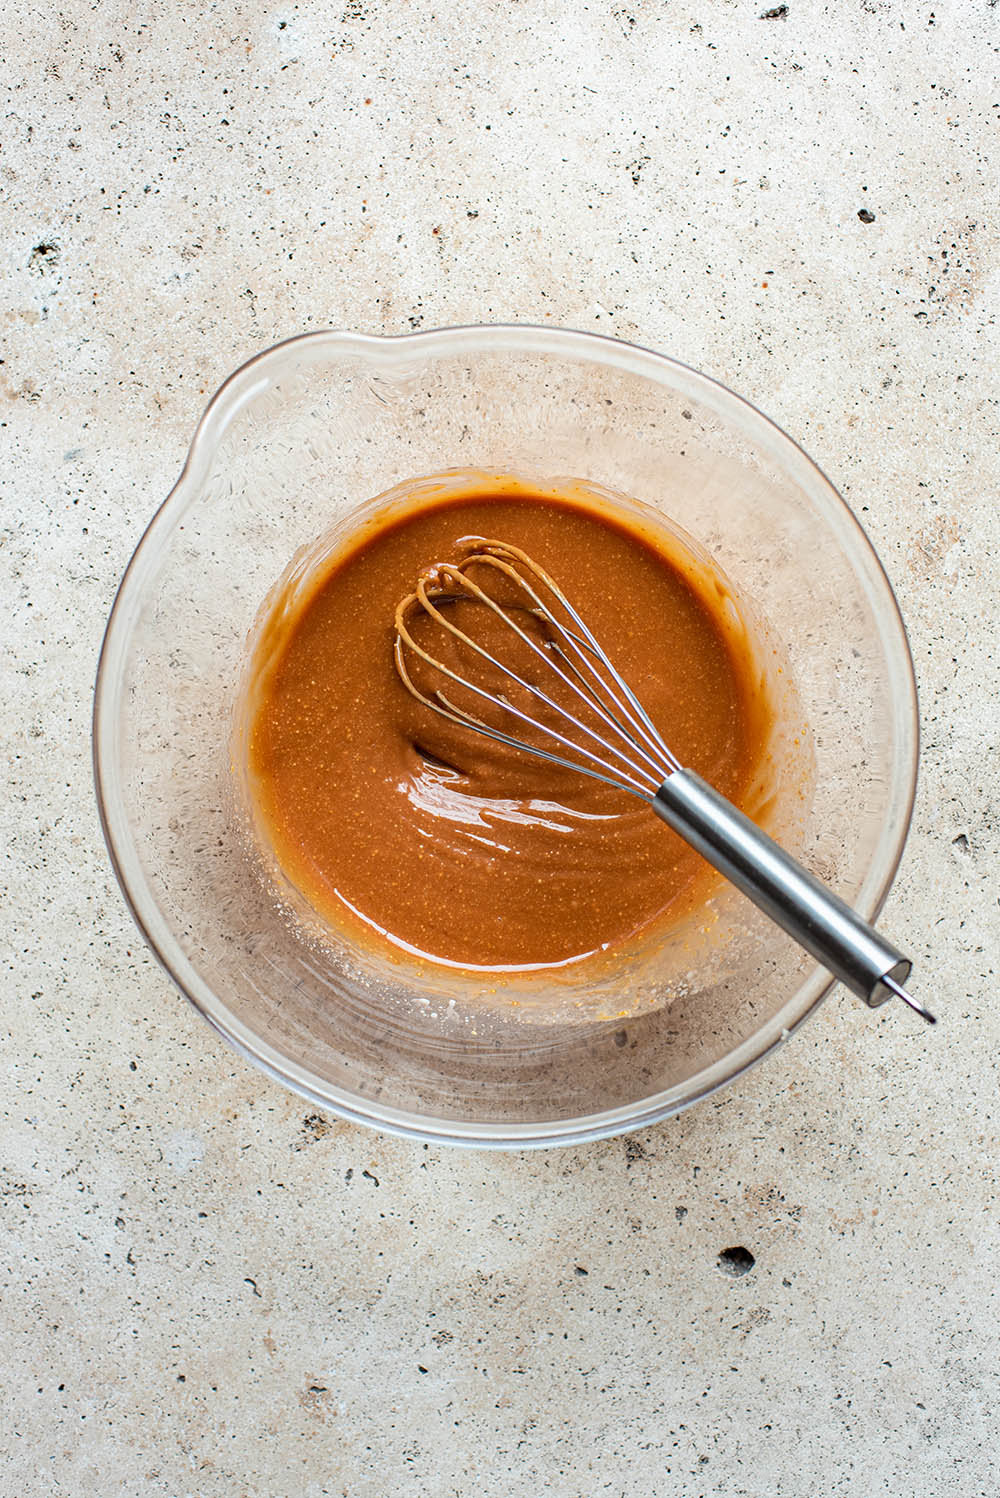 Whisked peanut butter mixture in a large glass bowl.